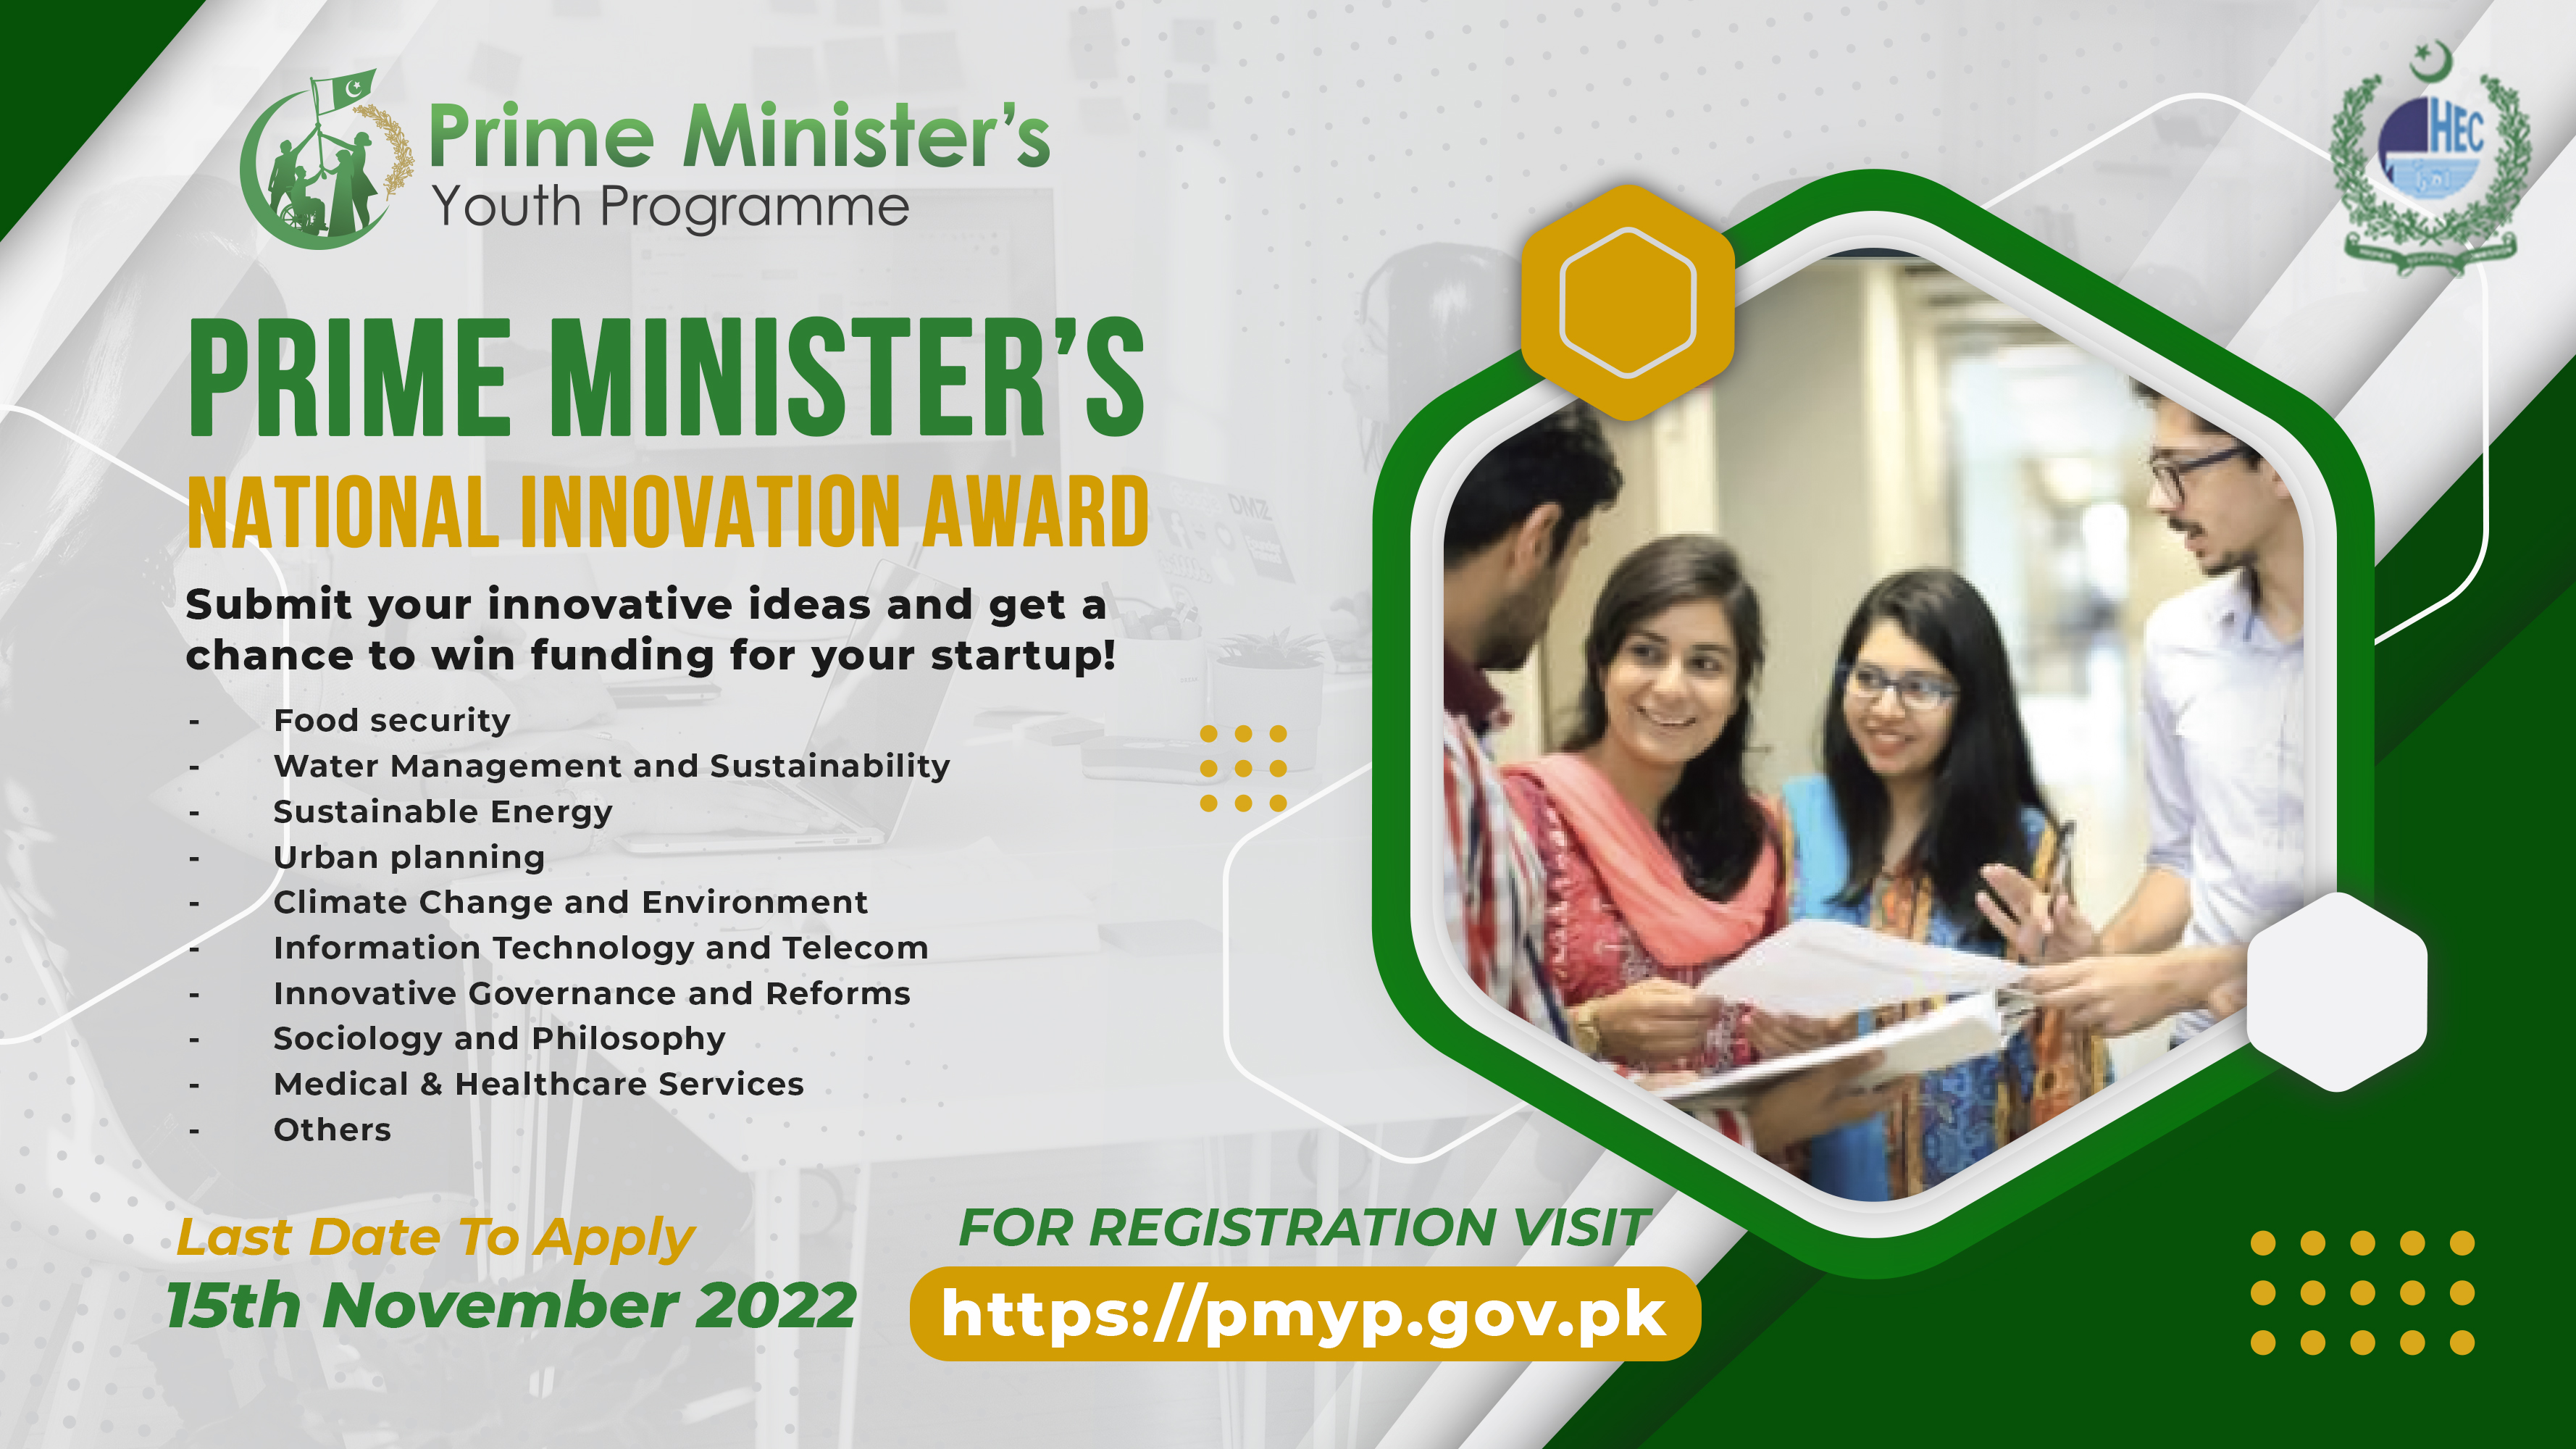 The Government has launched the National Innovation Award Program Apply Online